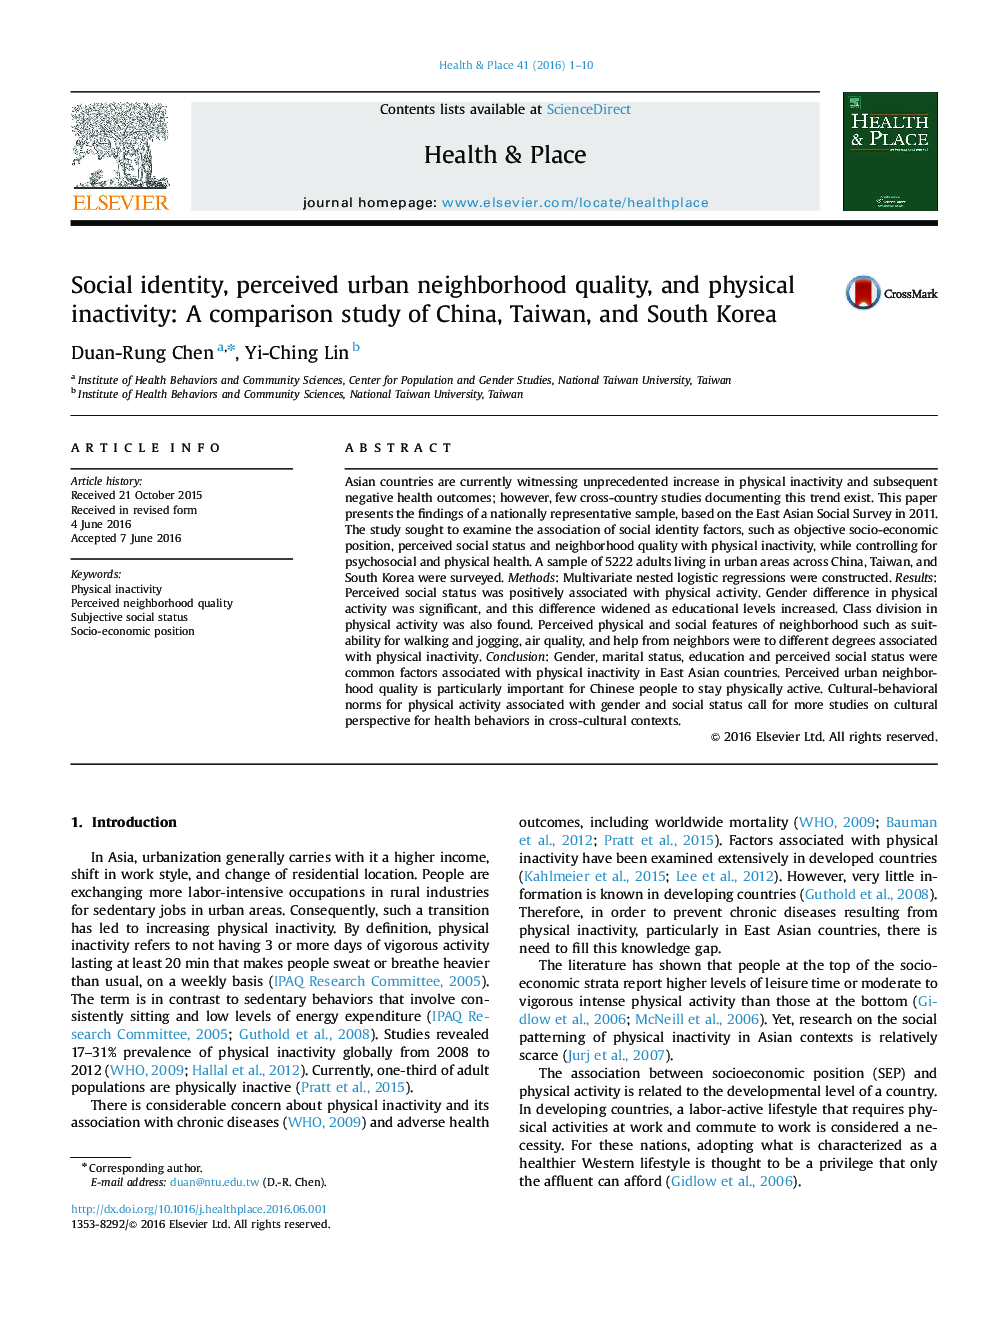 Social identity, perceived urban neighborhood quality, and physical inactivity: A comparison study of China, Taiwan, and South Korea